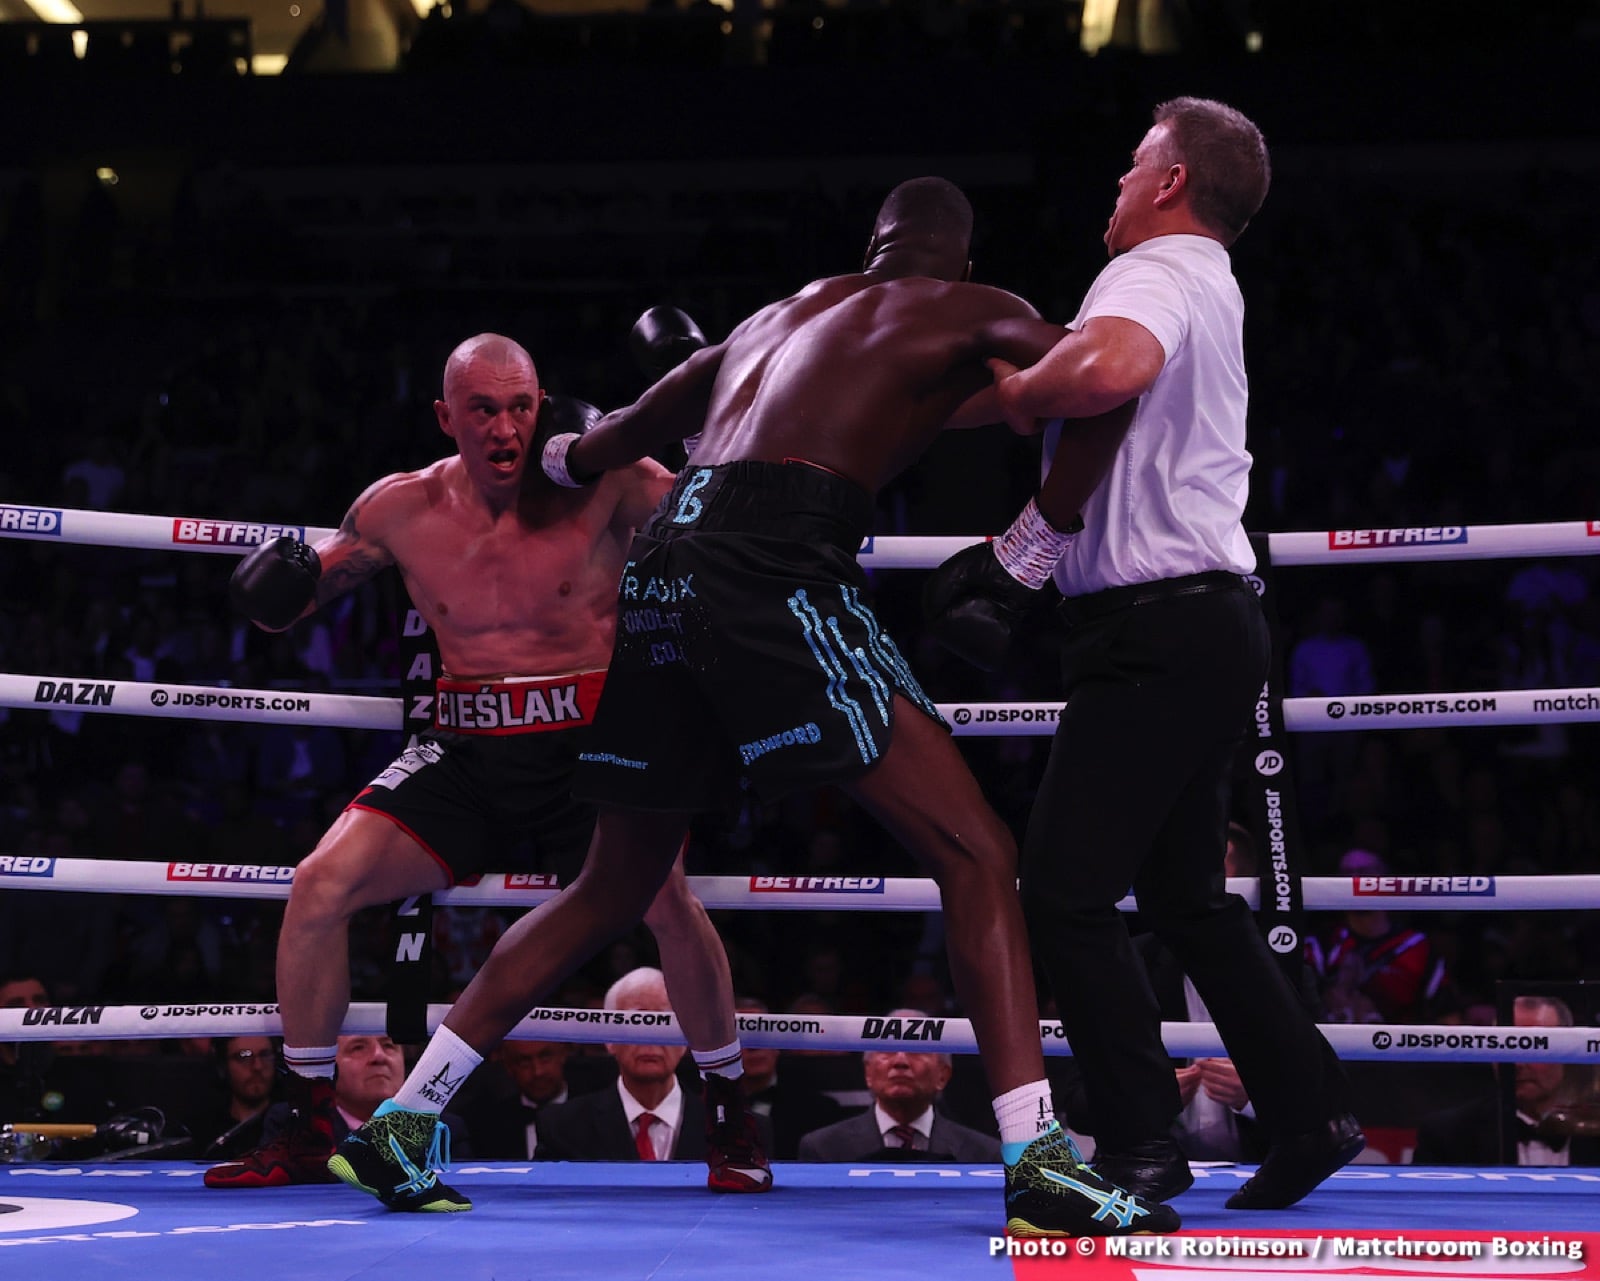 Lawrence Okolie vs. Michal Cieslak - LIVE action results from O2 in London